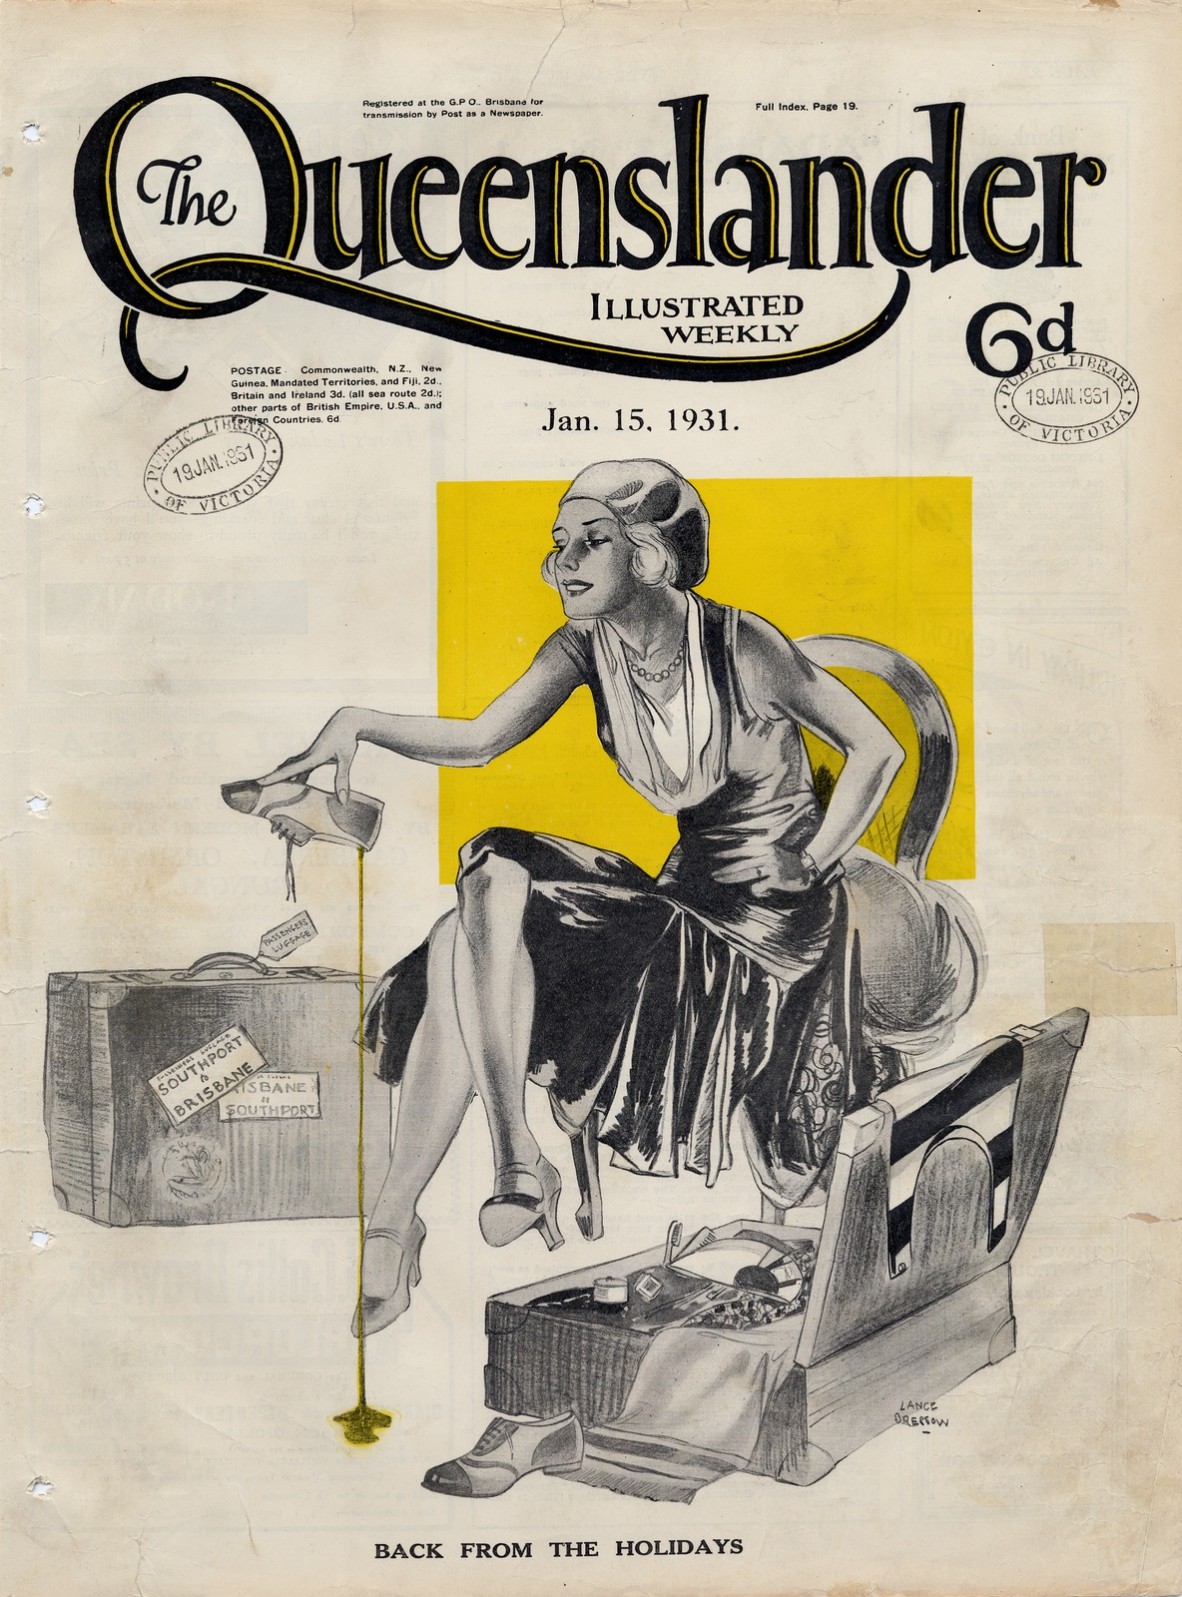 Illustrated front cover from The Queenslander January 15 1931